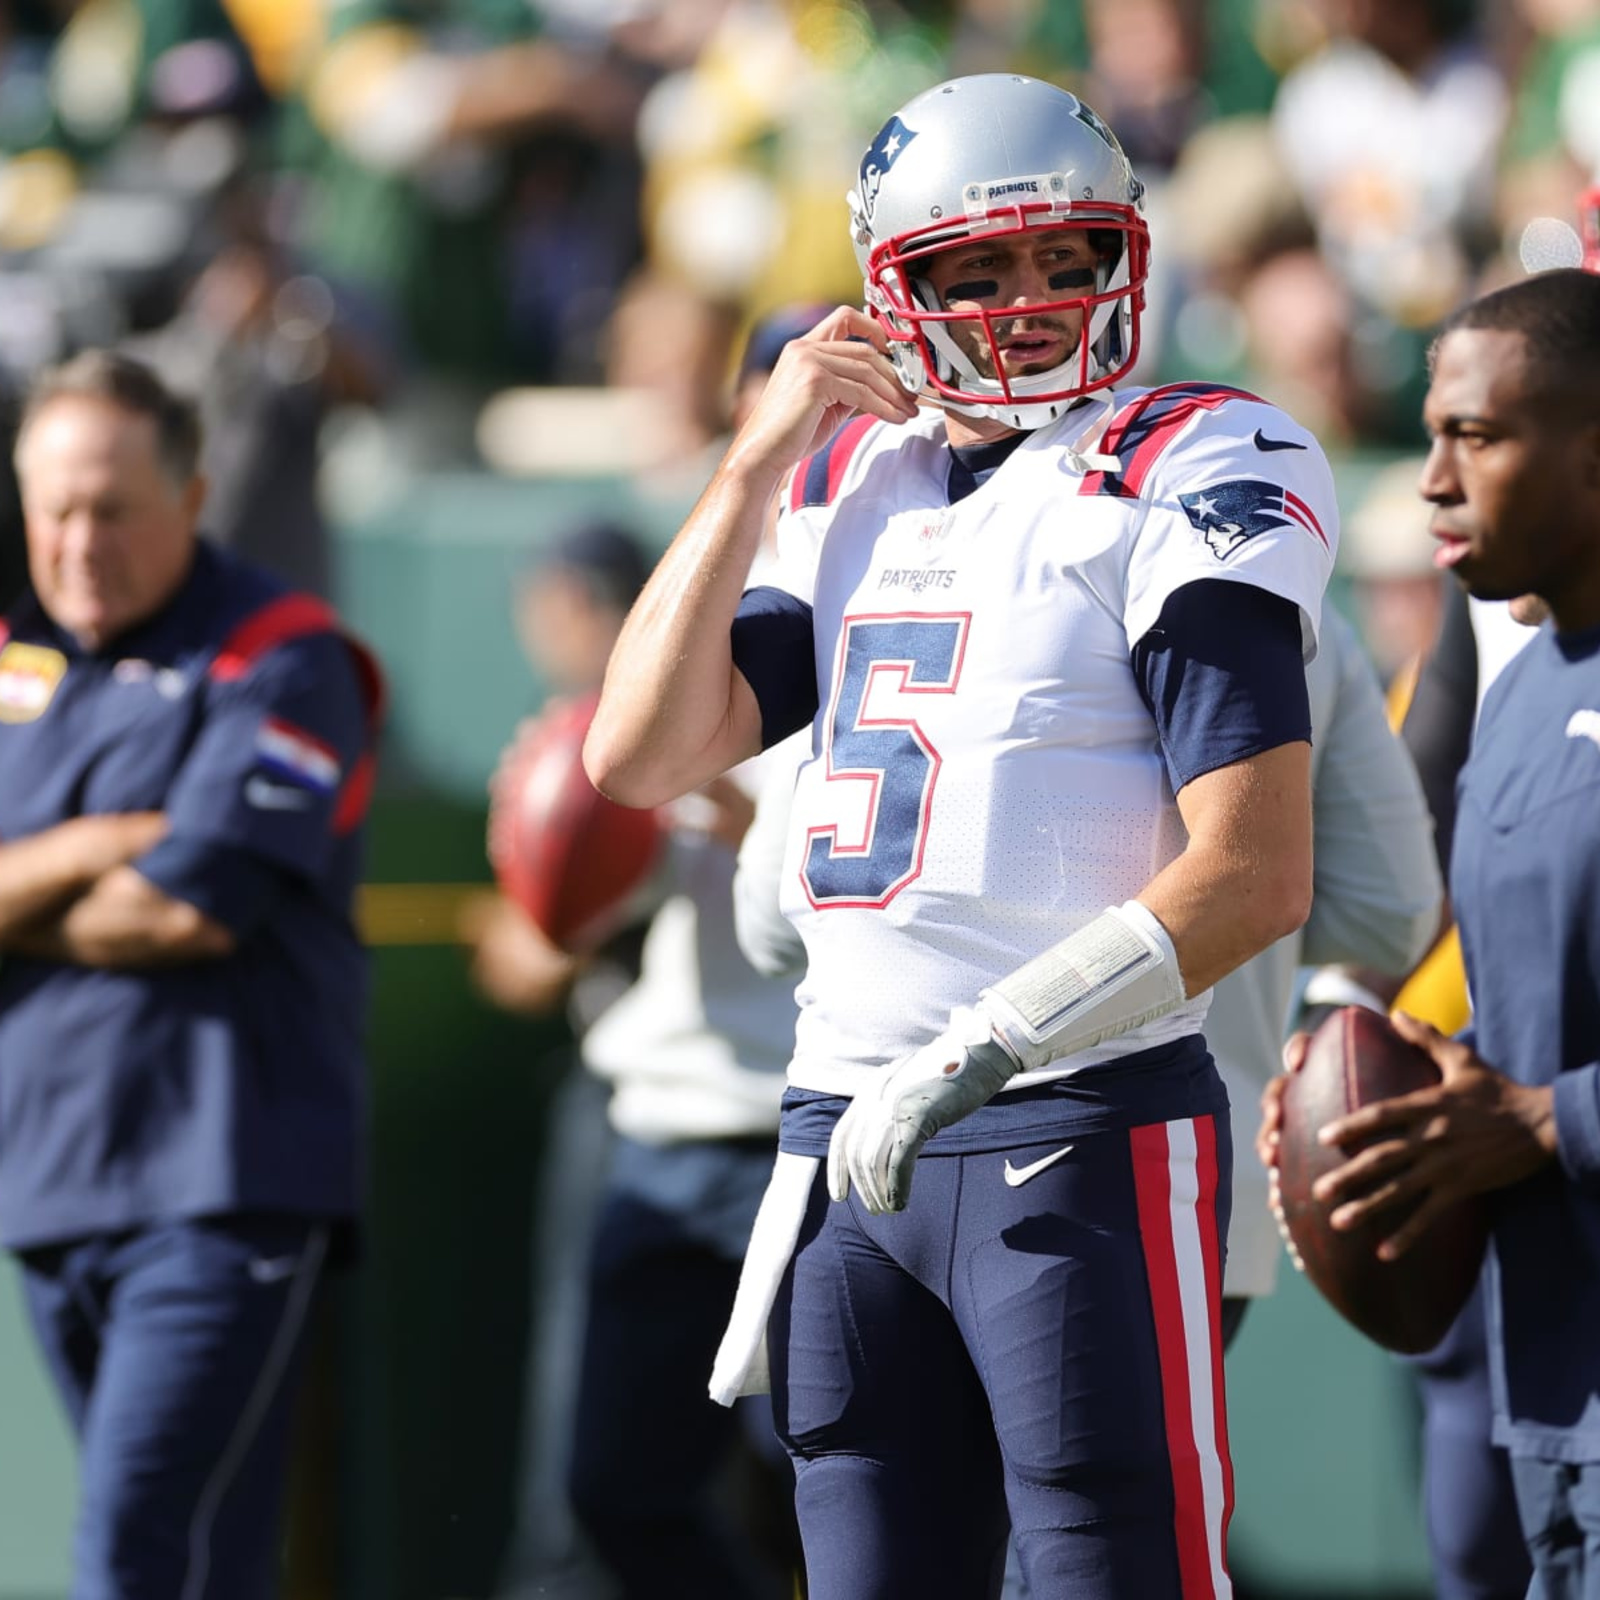 Patriots QB Hoyer taken to locker room after big sack by Packers